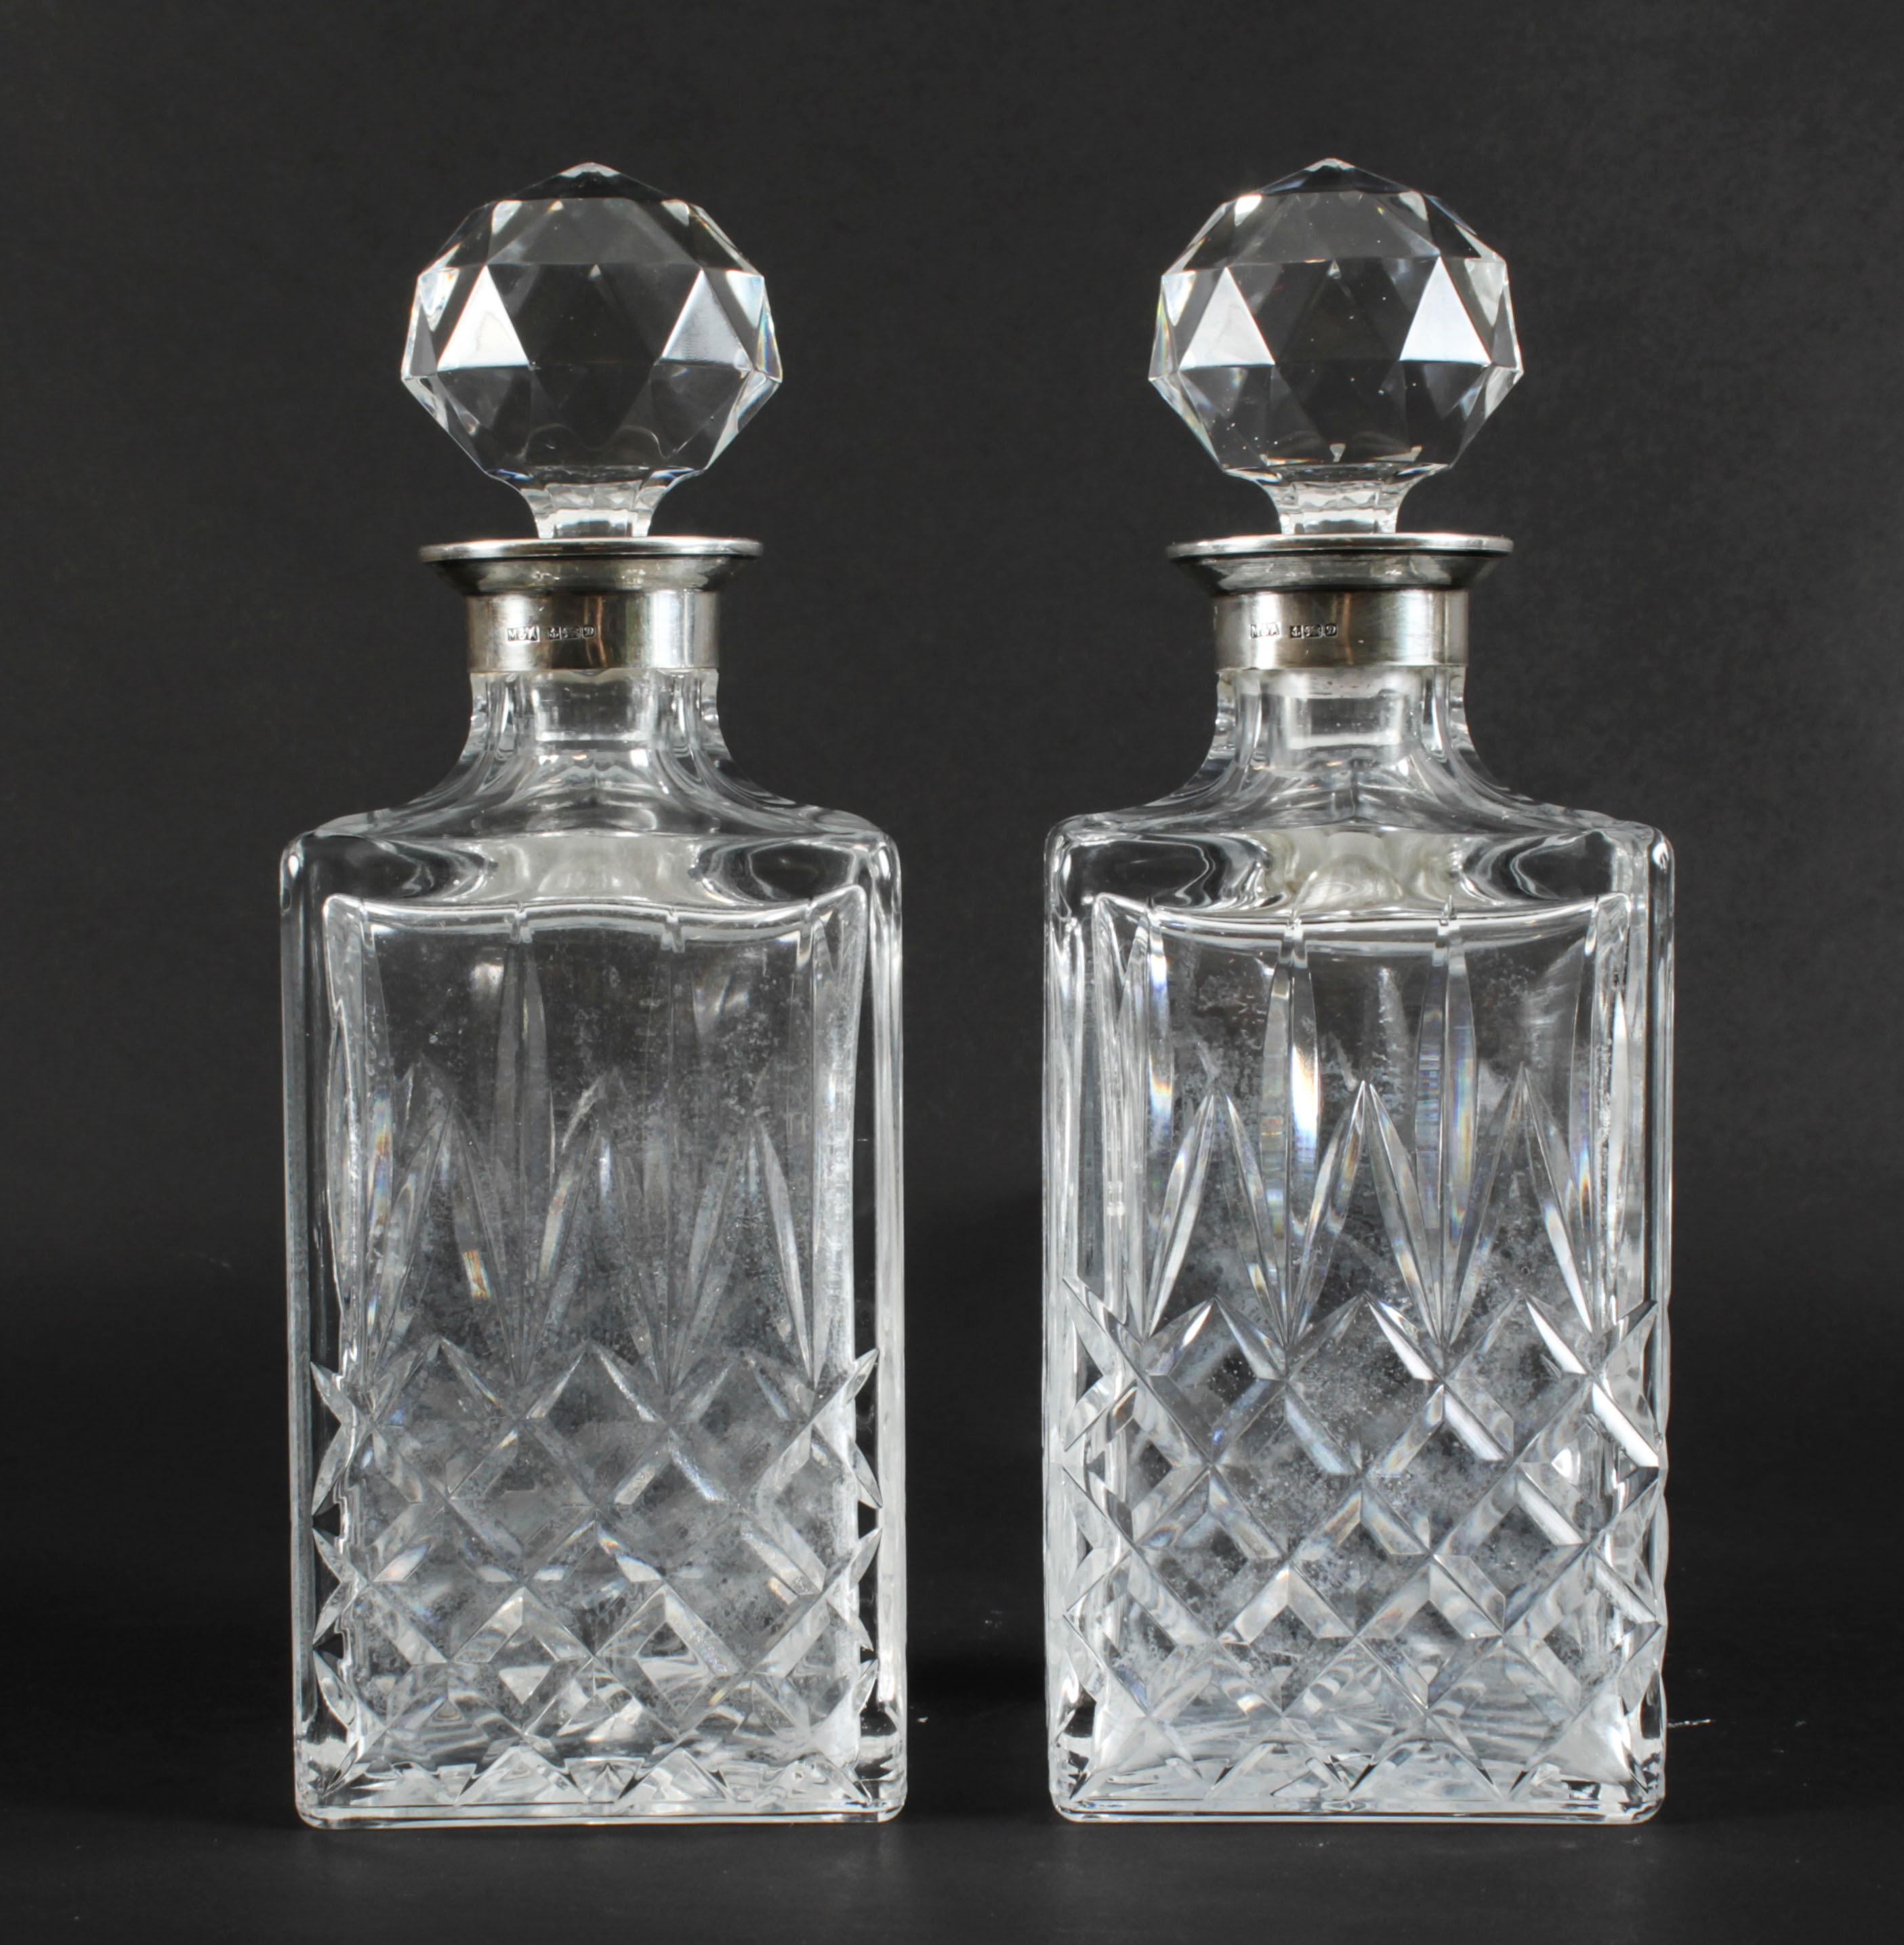 A superb pair of vintage sterling silver mounted hobnail-cut crystal square decanters and stoppers, with the makers mark of Moody & Archer and hallmarks for Birmingham 1978.
Add an elegant touch to your next dining experience.
 
Condition:
In